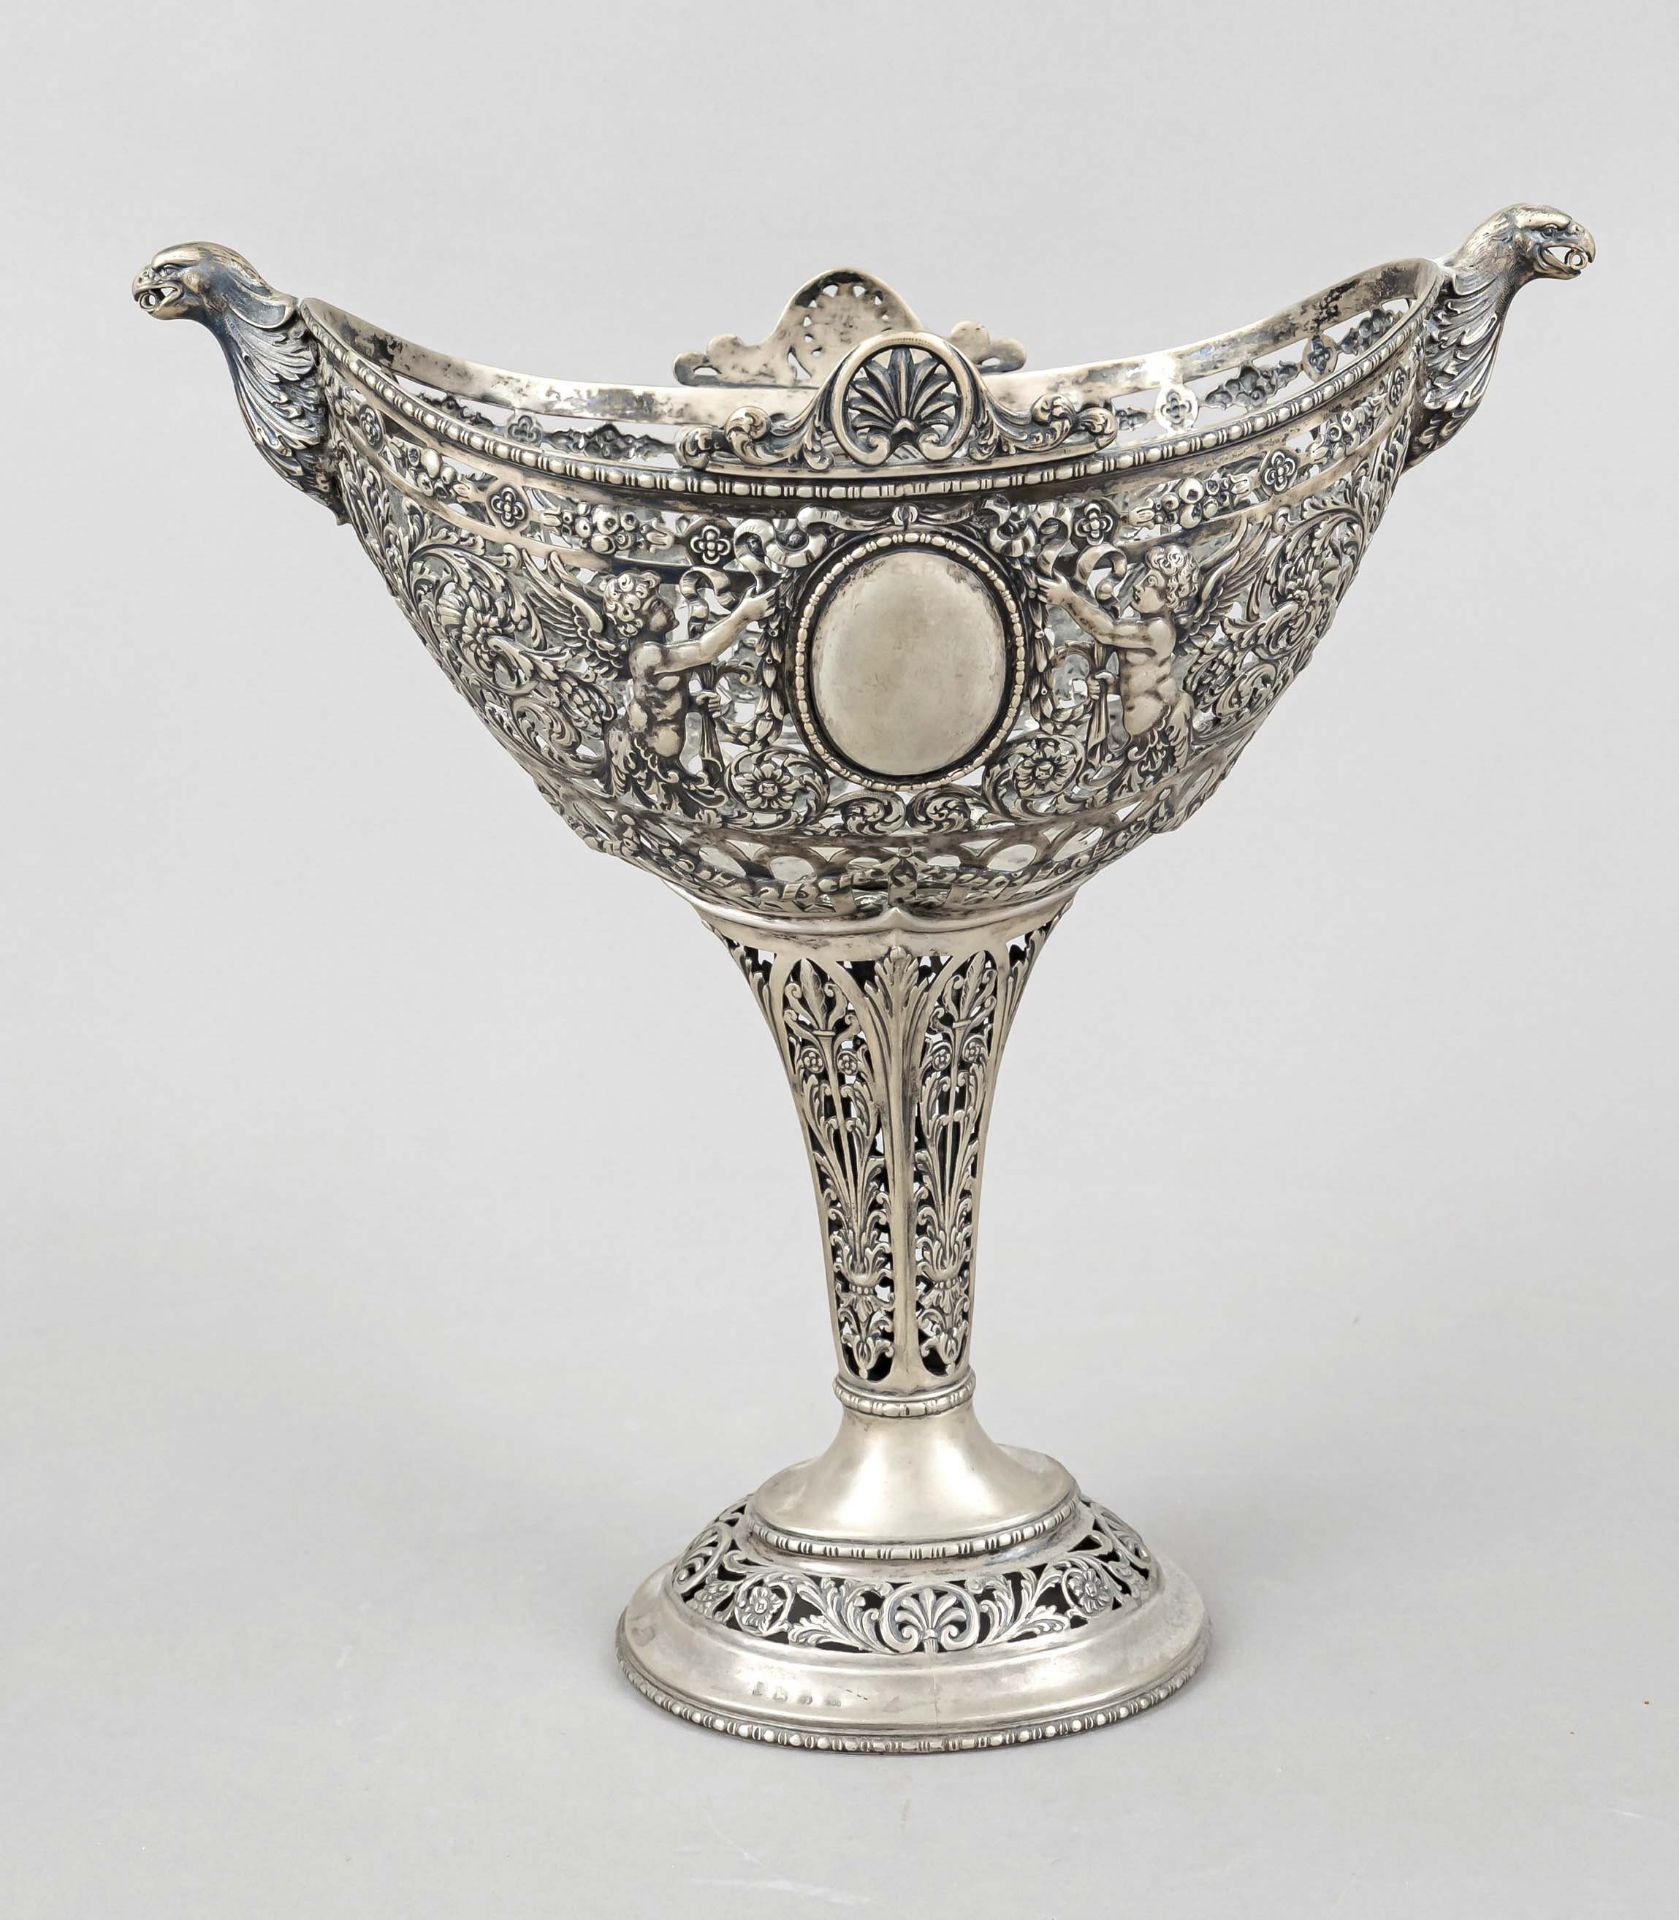 Top bowl, probably German, chipped hallmarks, silver 800/000, oval, vaulted stand, conical shaft,